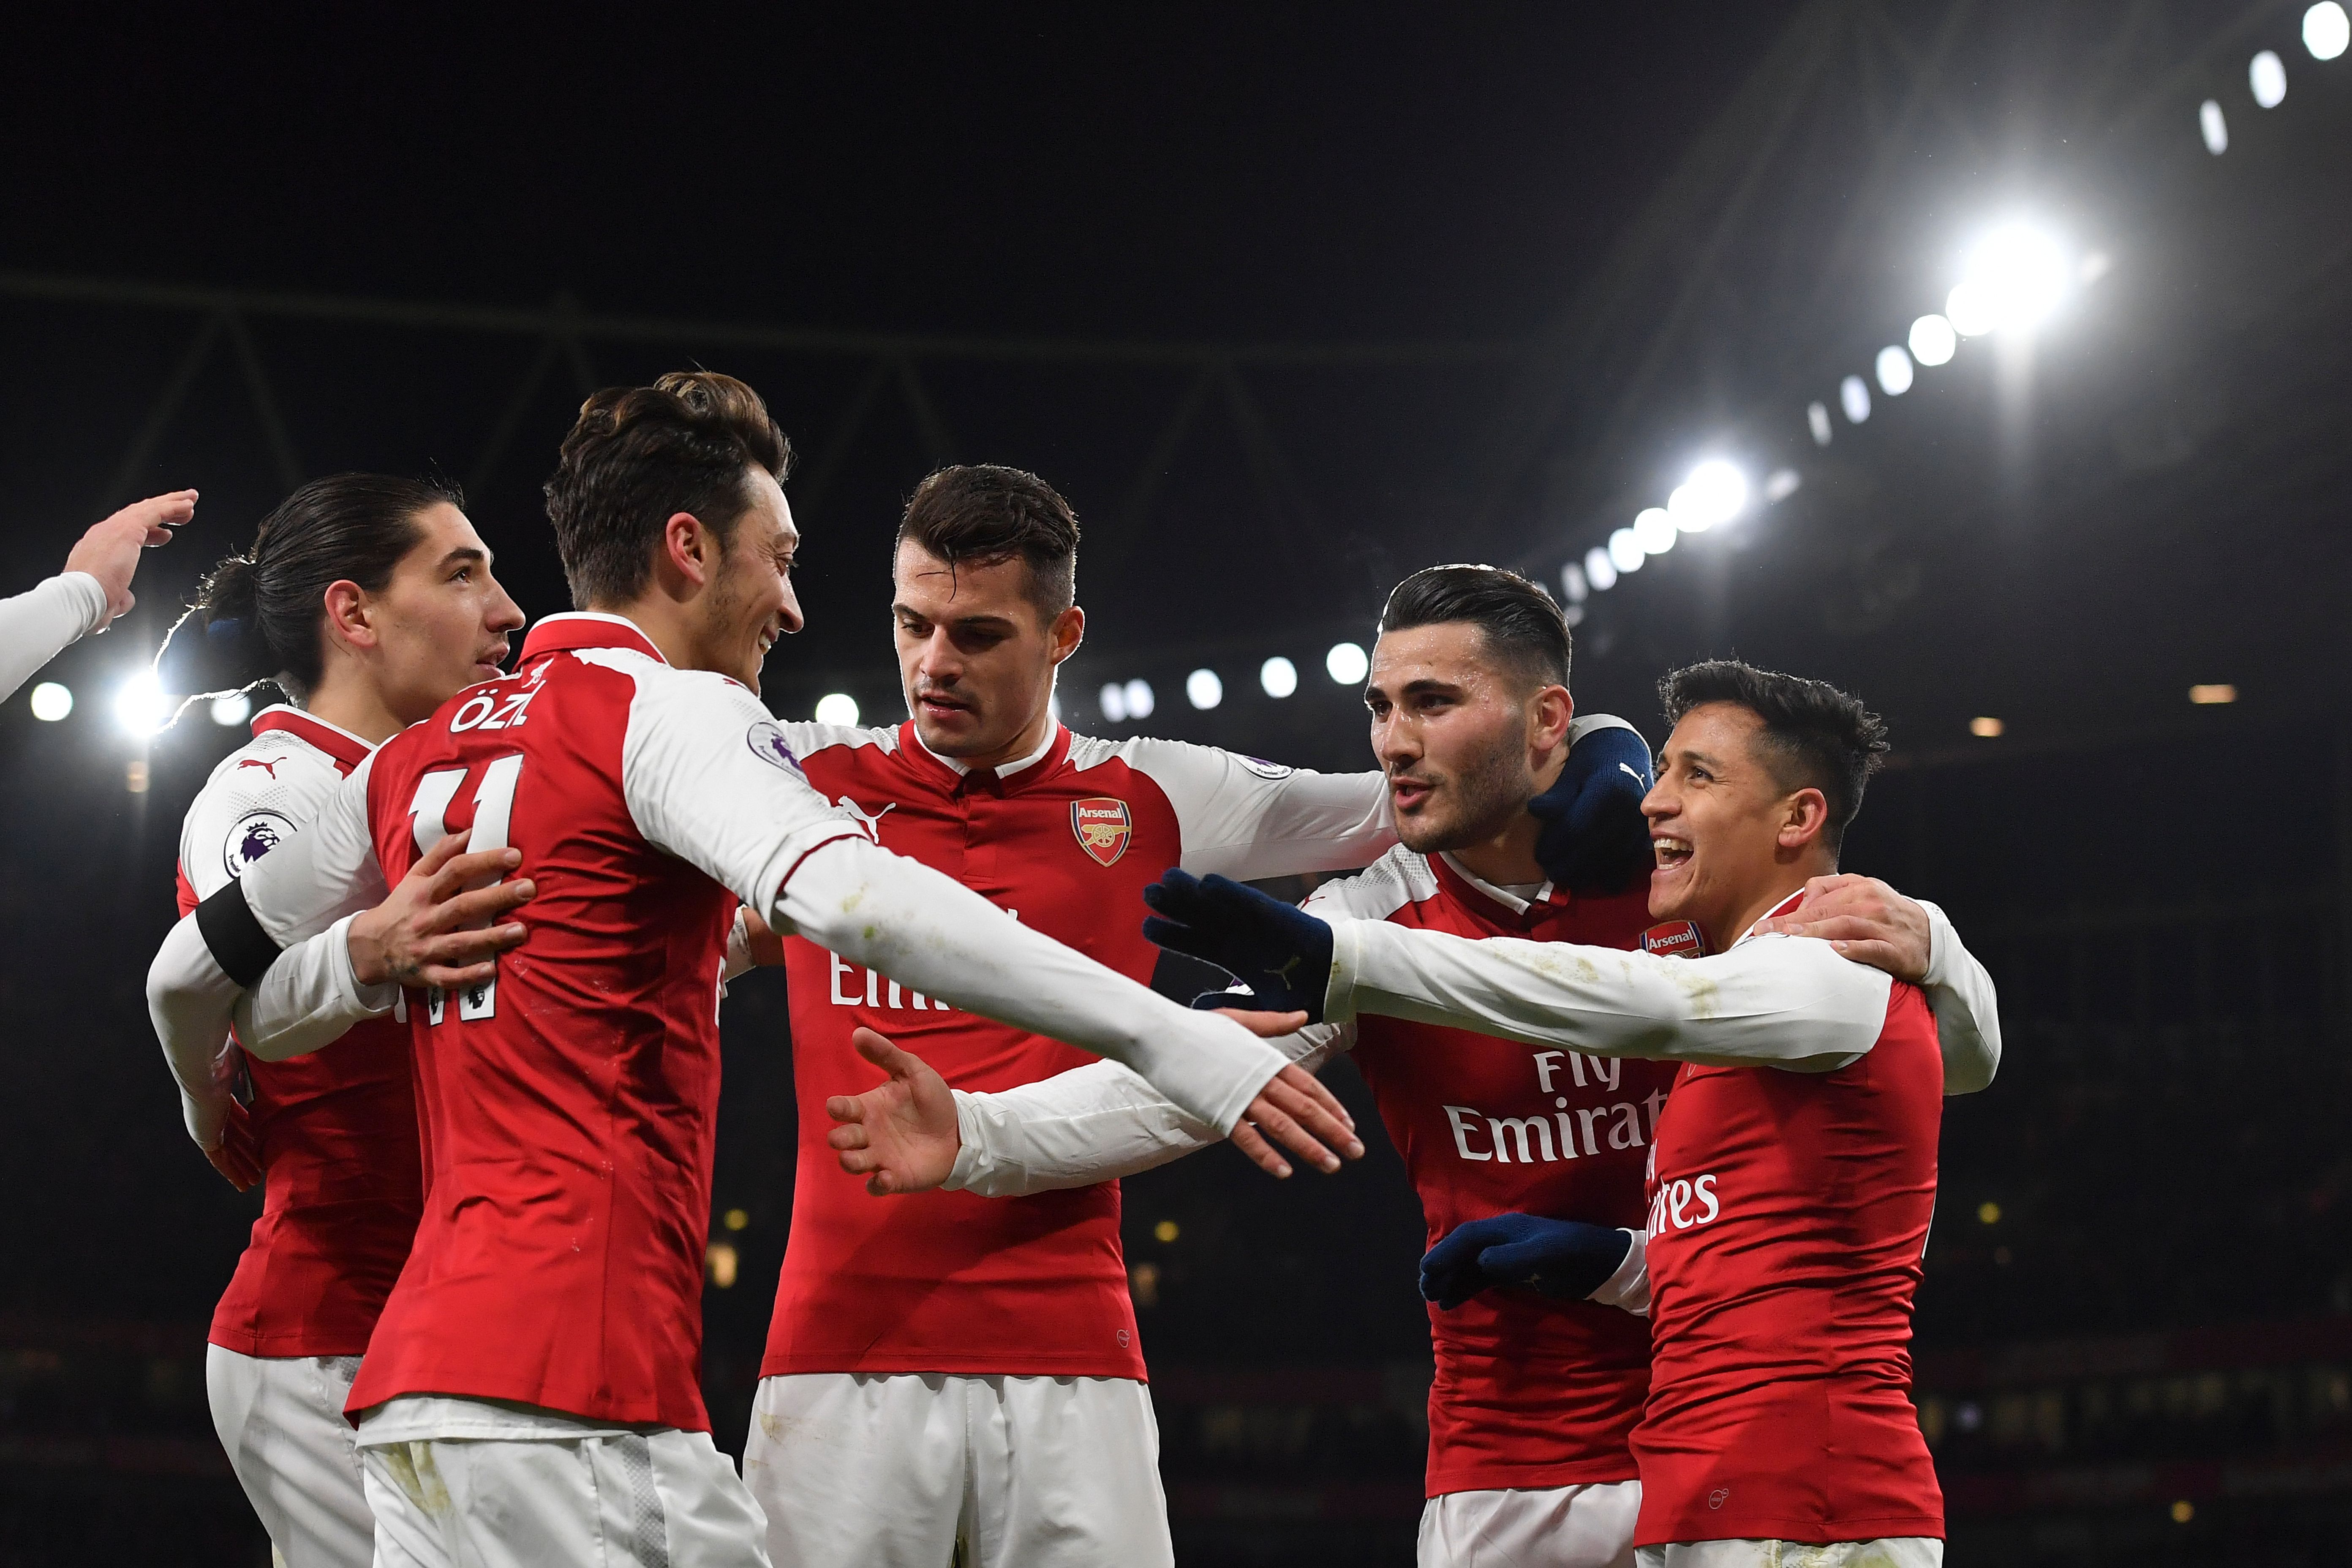 Arsenal's Chilean striker Alexis Sanchez (R) celebrates scoring their third goal during the English Premier League football match between Arsenal and Huddersfield Town at the Emirates Stadium in London on November 29, 2017.  / AFP PHOTO / Ben STANSALL / RESTRICTED TO EDITORIAL USE. No use with unauthorized audio, video, data, fixture lists, club/league logos or 'live' services. Online in-match use limited to 75 images, no video emulation. No use in betting, games or single club/league/player publications.  /         (Photo credit should read BEN STANSALL/AFP/Getty Images)